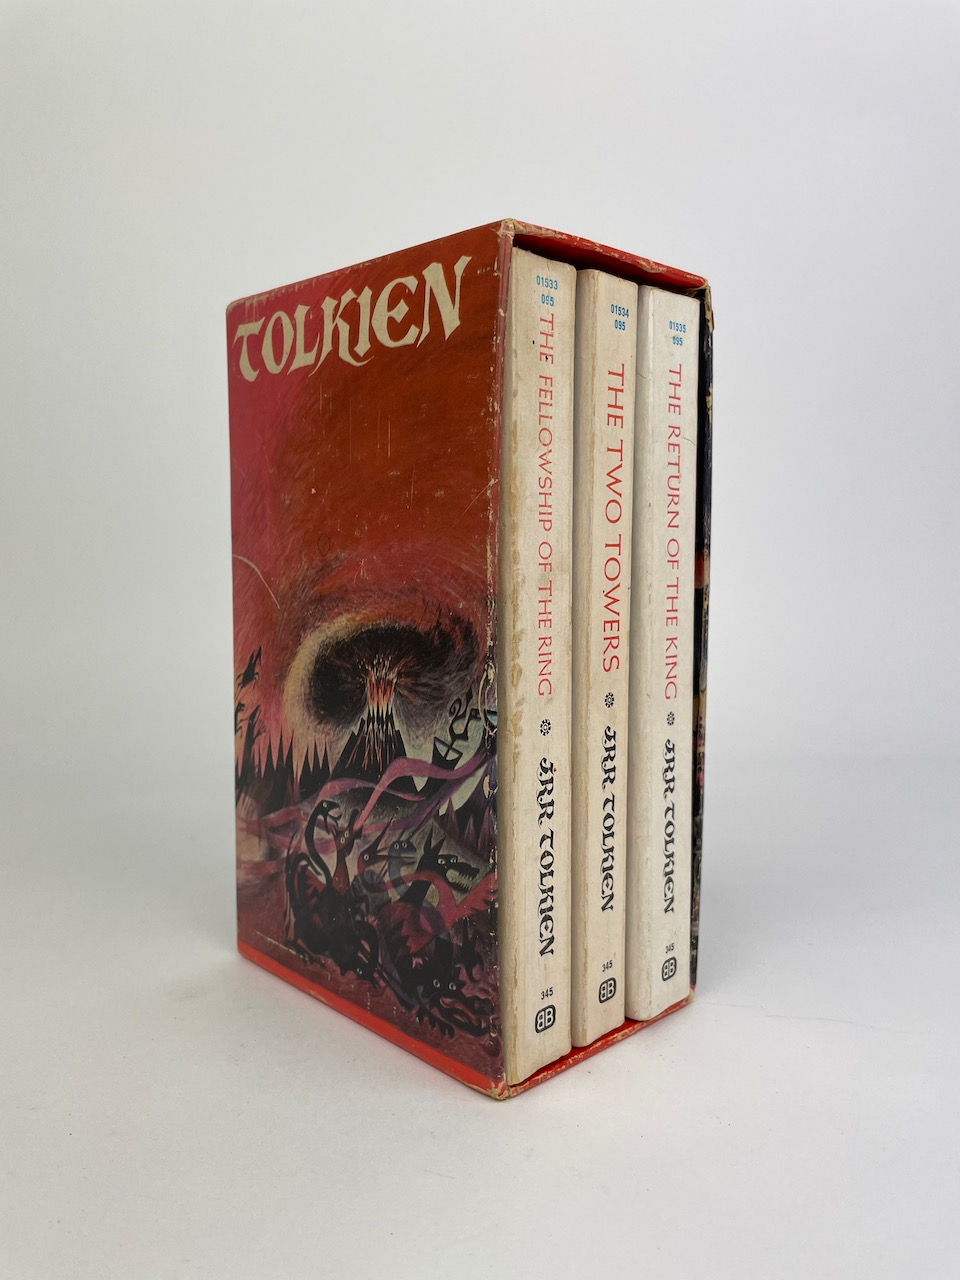 The Lord of the Rings, Paperback Book Boxset from 1969, 3 volumes in Barabara Remmington Slipcase